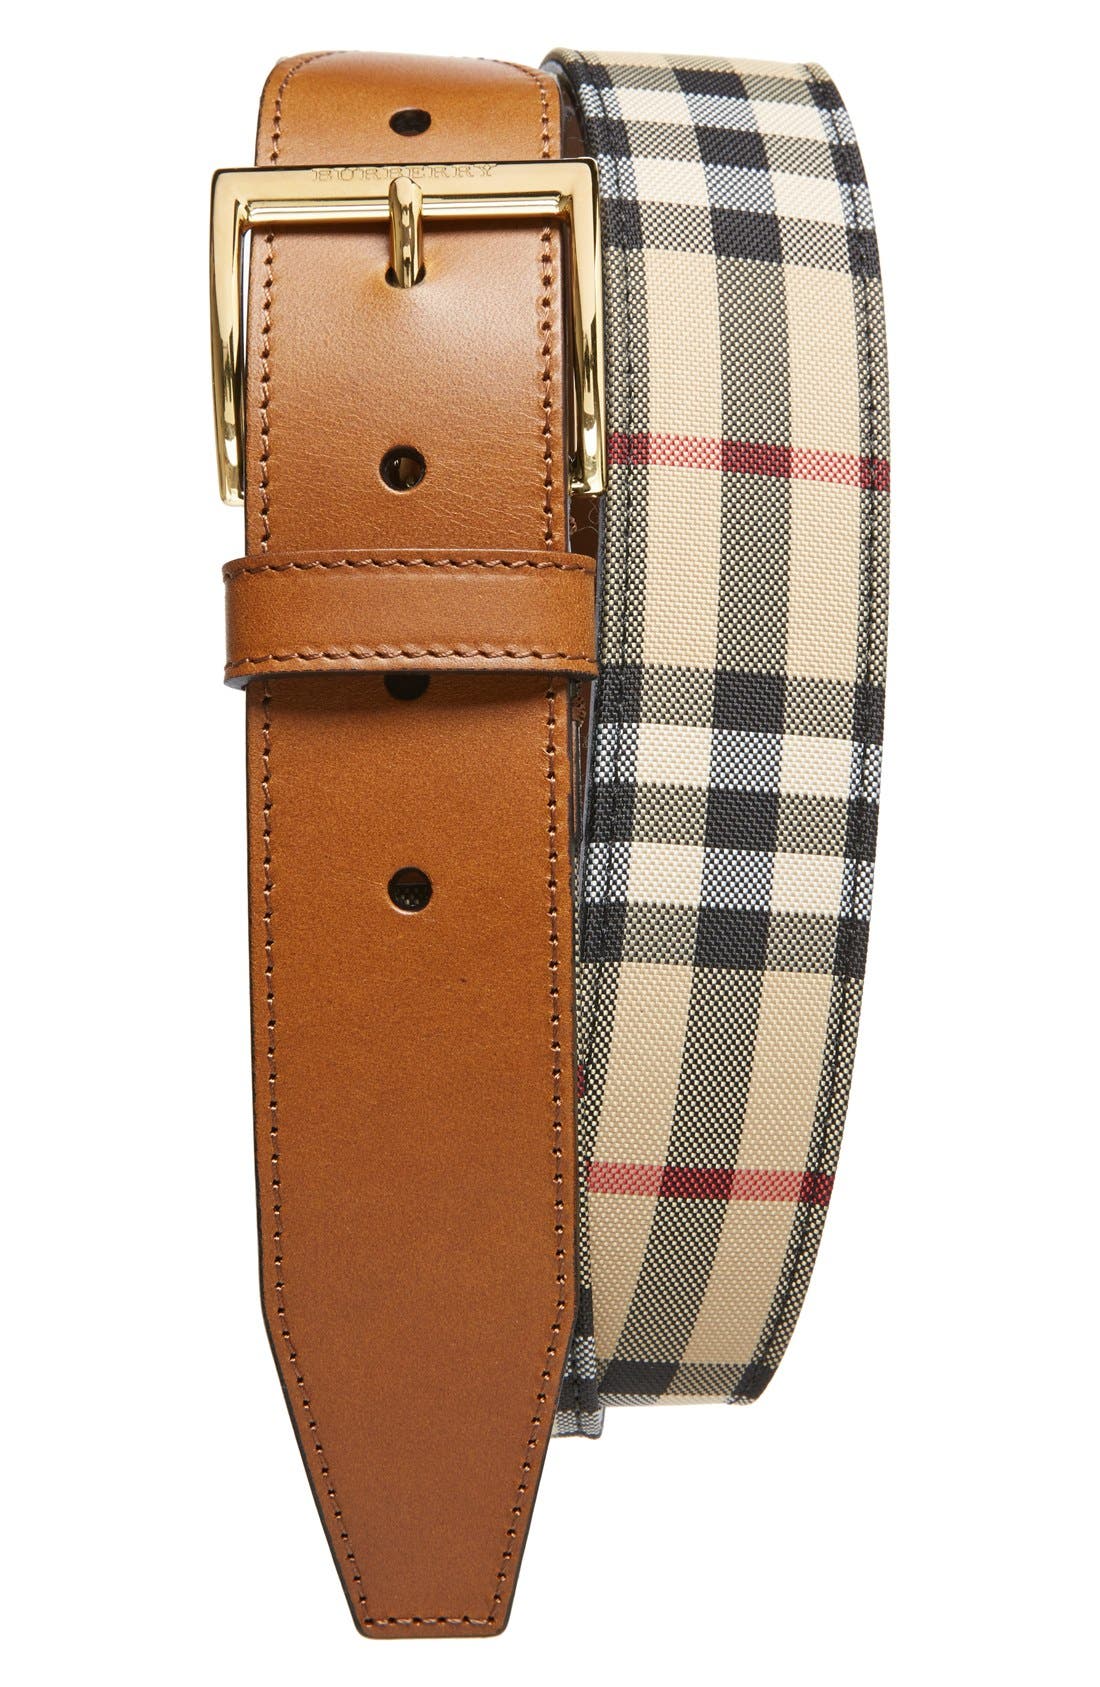 burberry horseferry check and leather belt